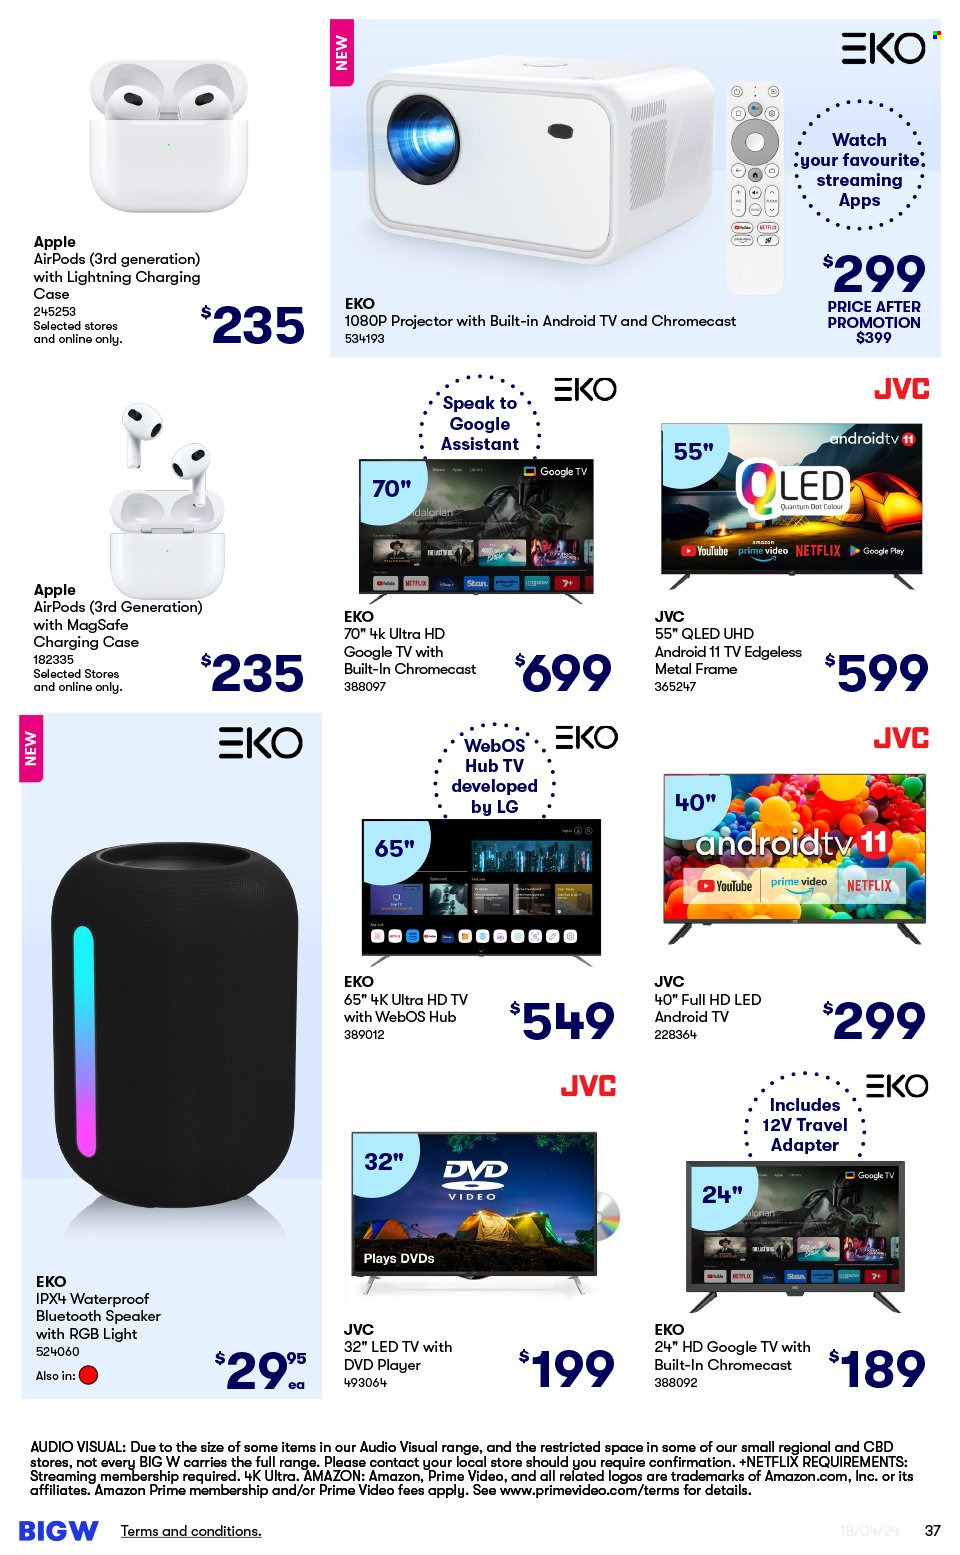 thumbnail - BIG W Catalogue - Sales products - Apple, JVC, Android TV, LED TV, smart tv, UHD TV, ultra hd, HDTV, TV, dvd player, projector, speaker, bluetooth speaker, Airpods, earbuds, adapter, Google Chromecast, metal frame, watch. Page 37.